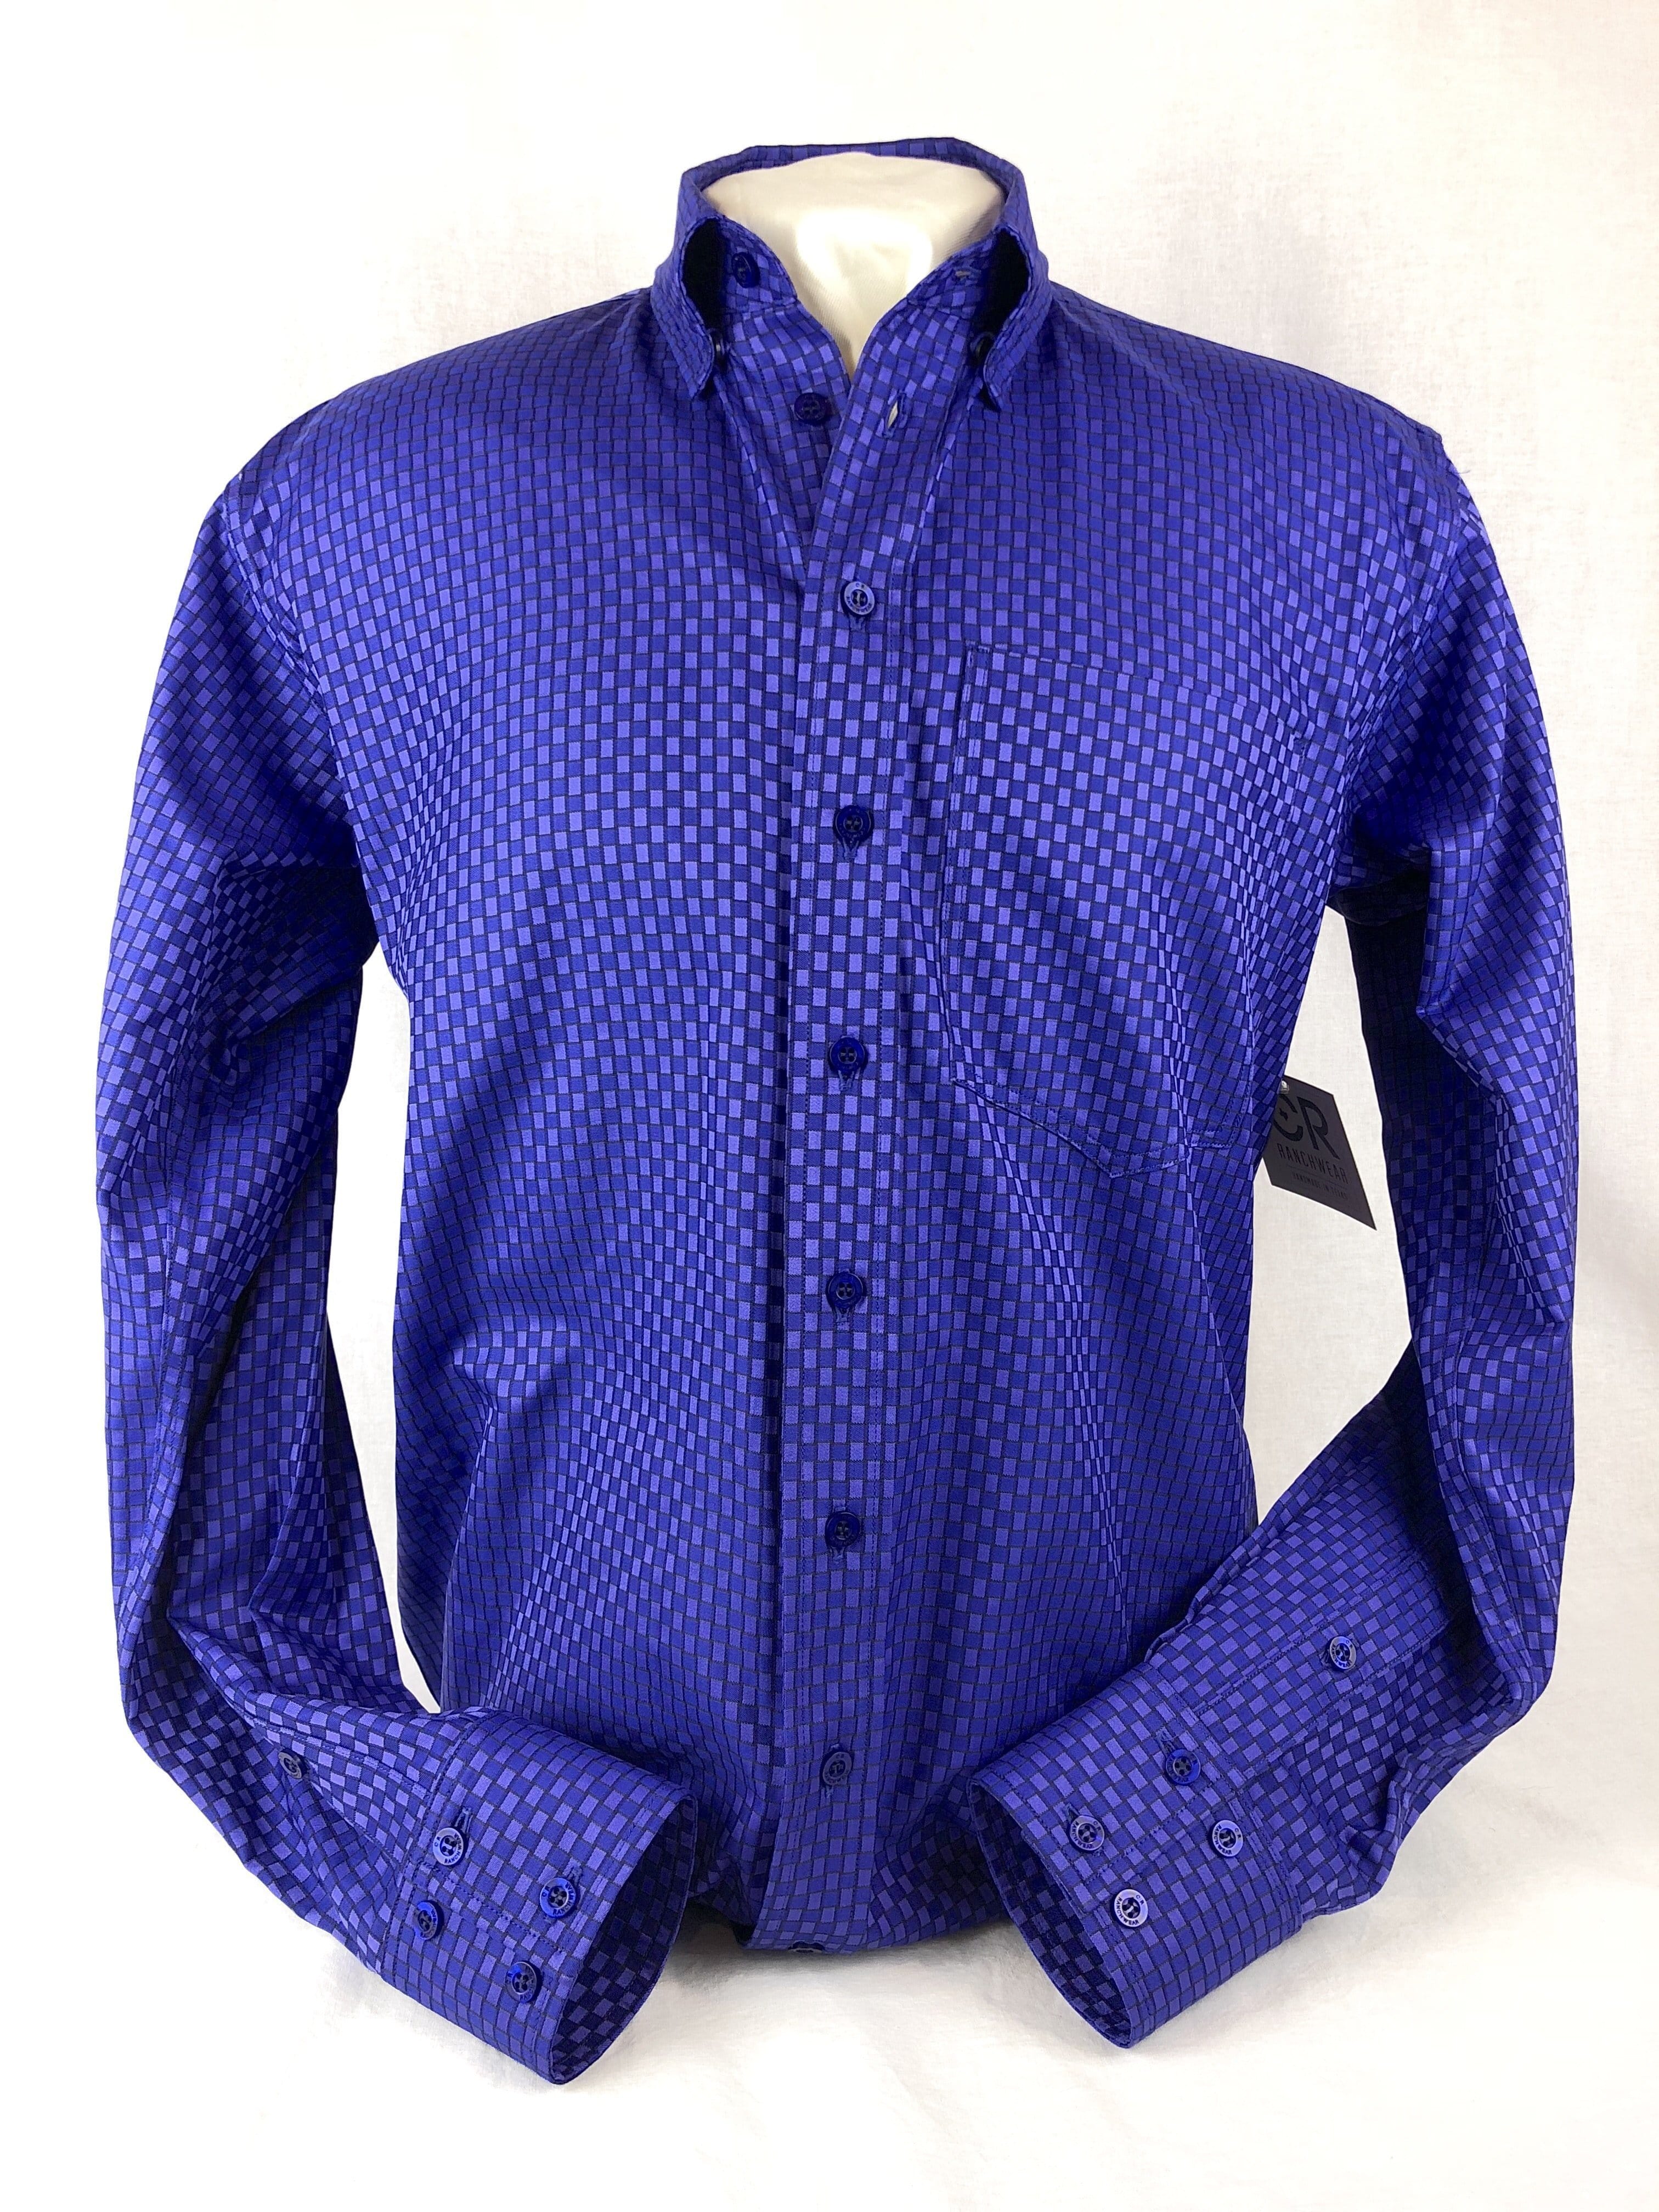 Buy CR Western Pro Shades of Purple Italian Cotton at CR RanchWear for ...